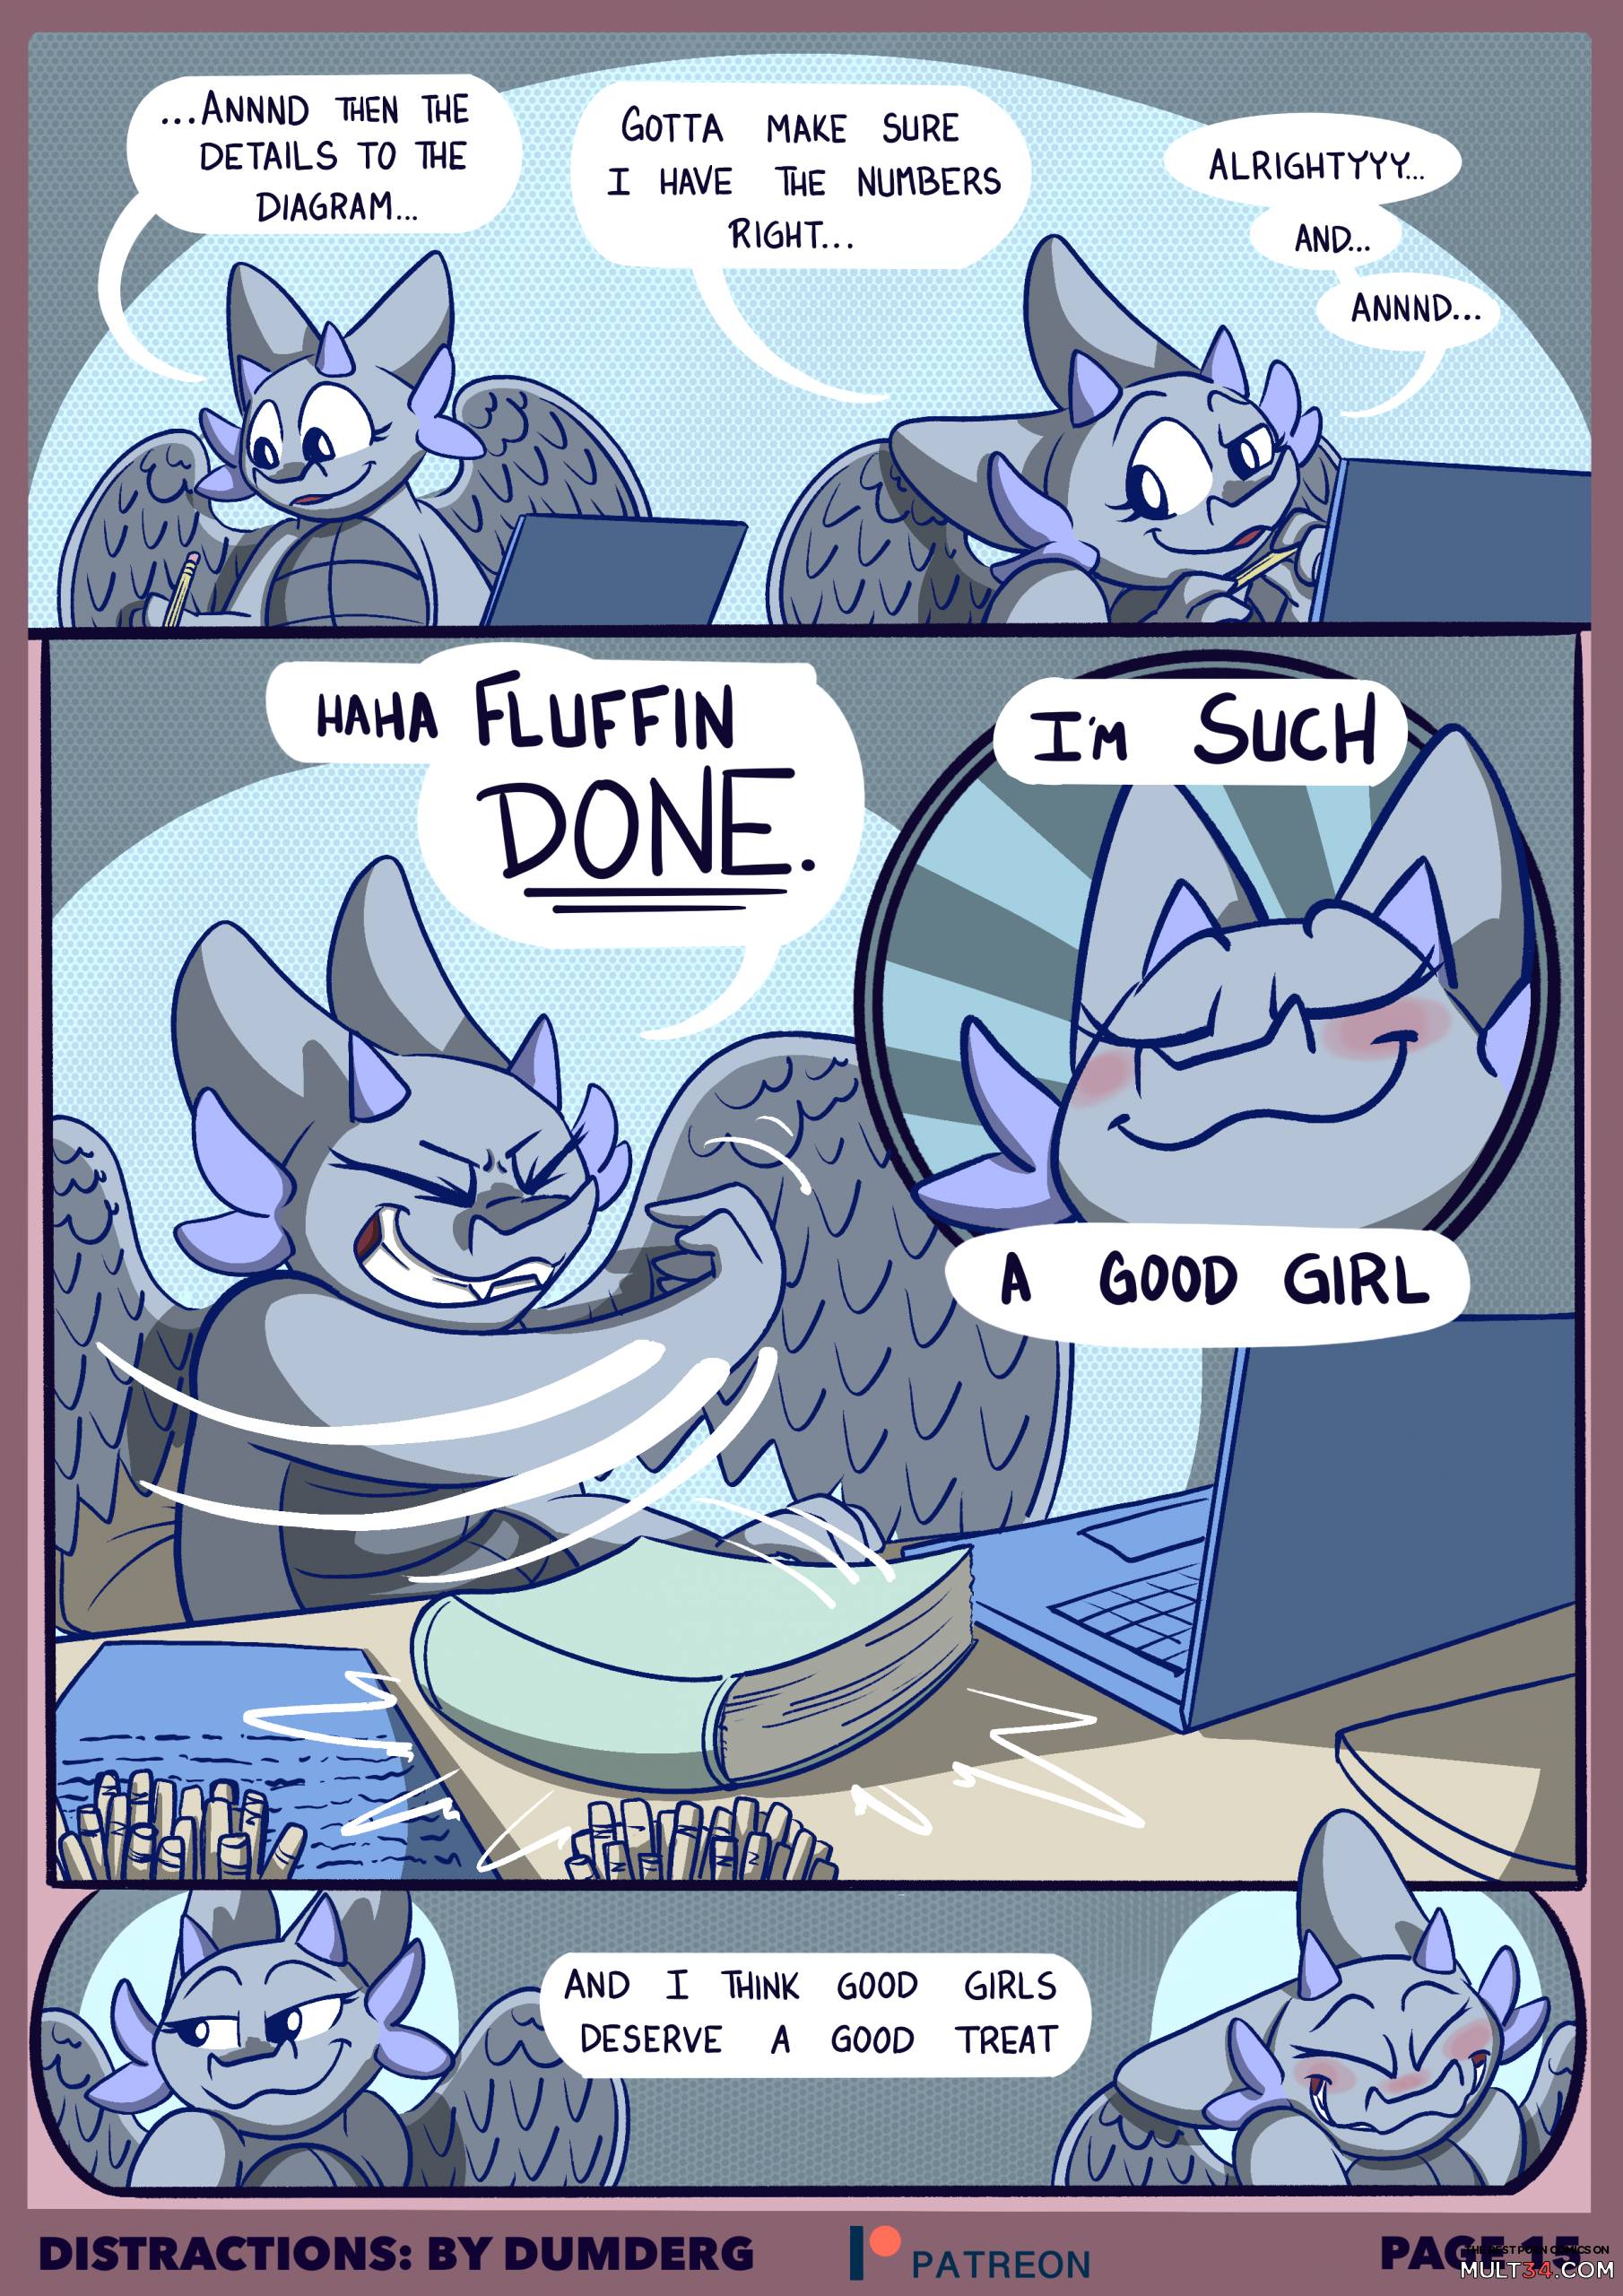 Distractions - DumDerg page 16